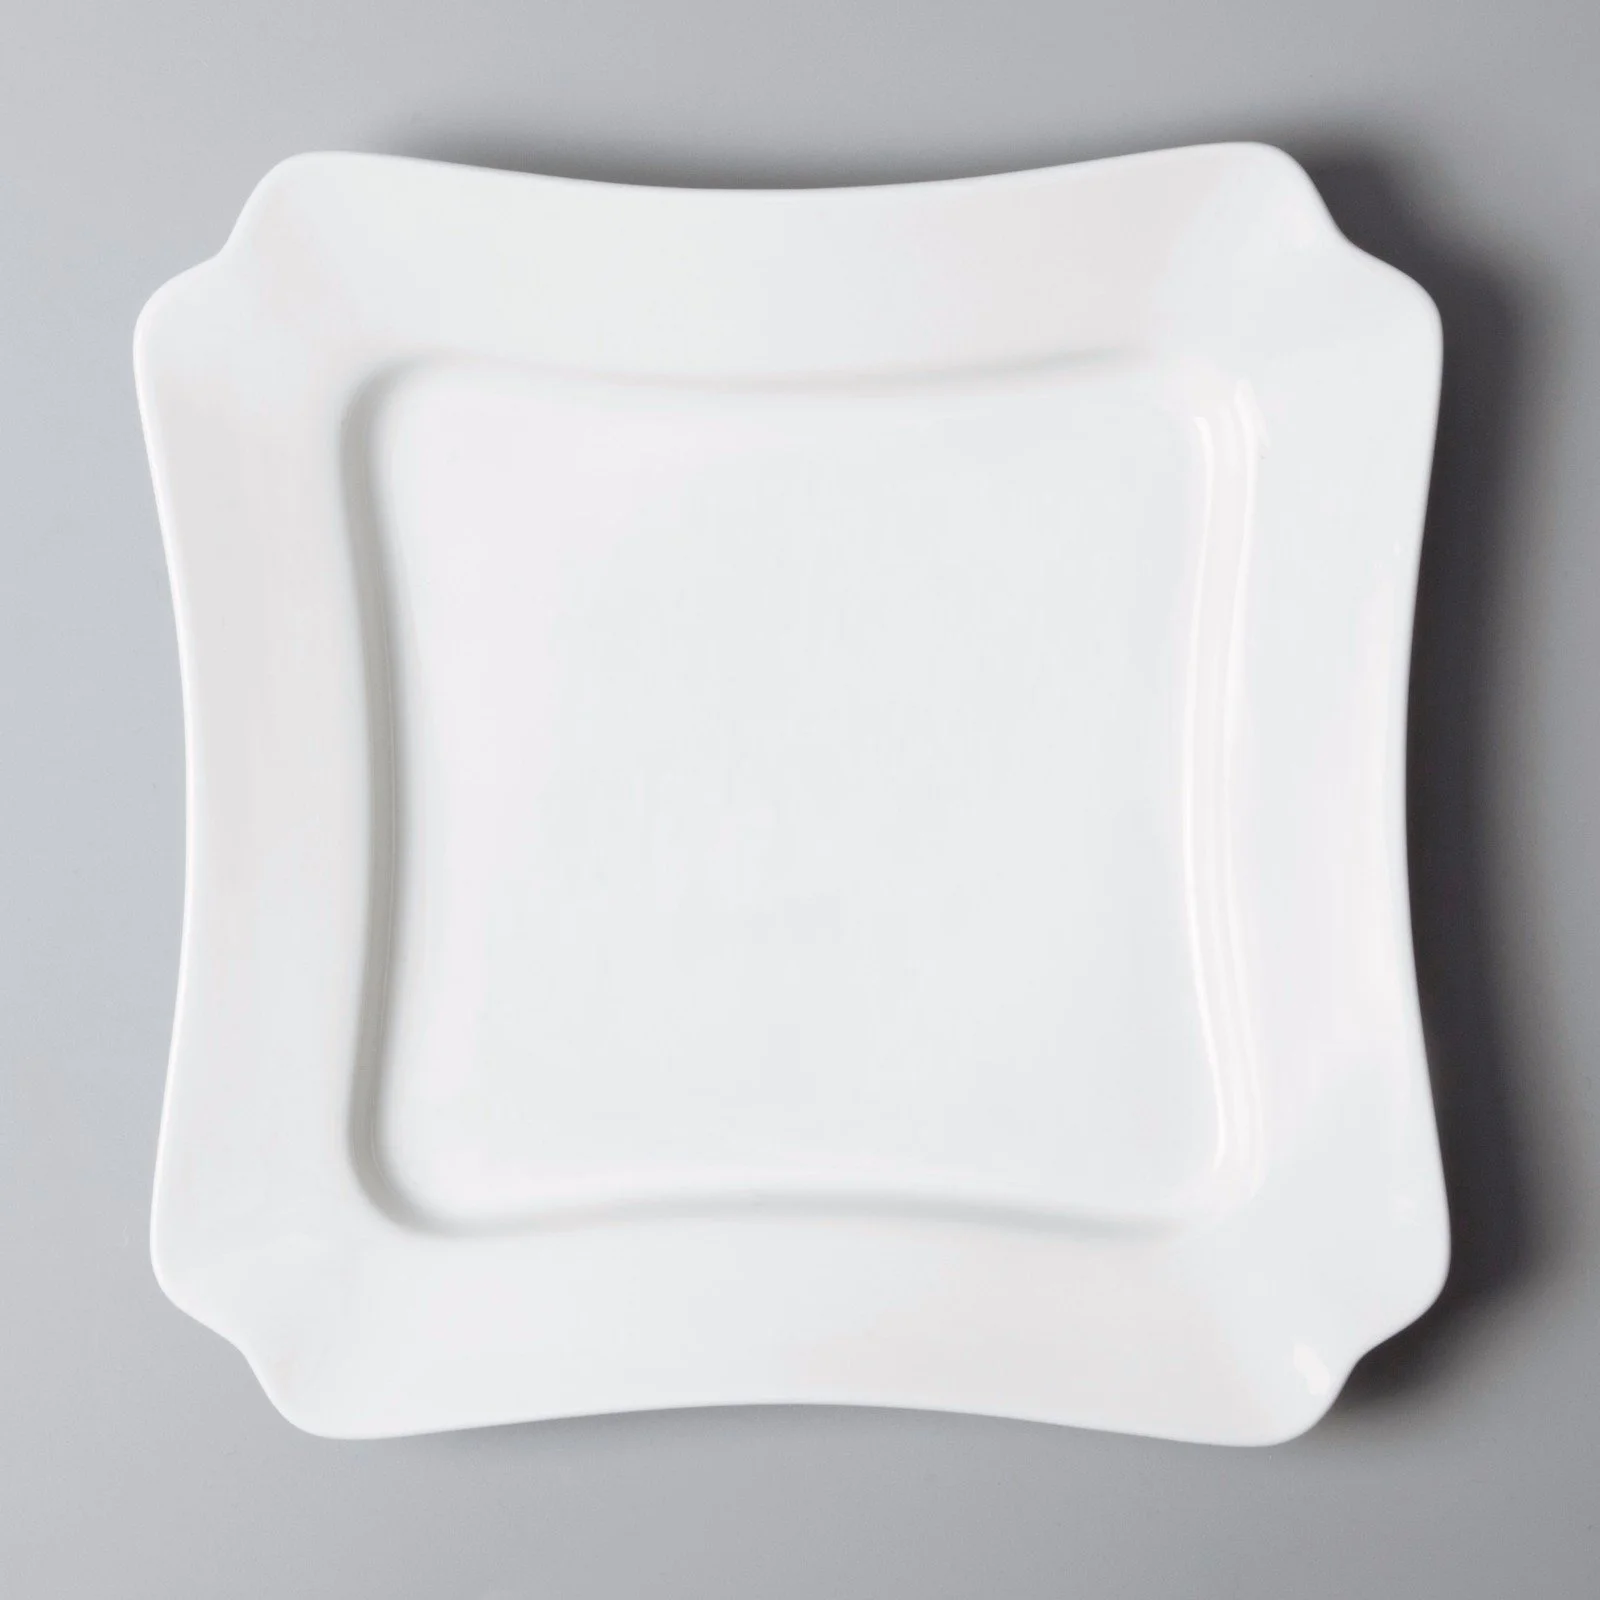 Two Eight Brand meng color white porcelain tableware stock supplier